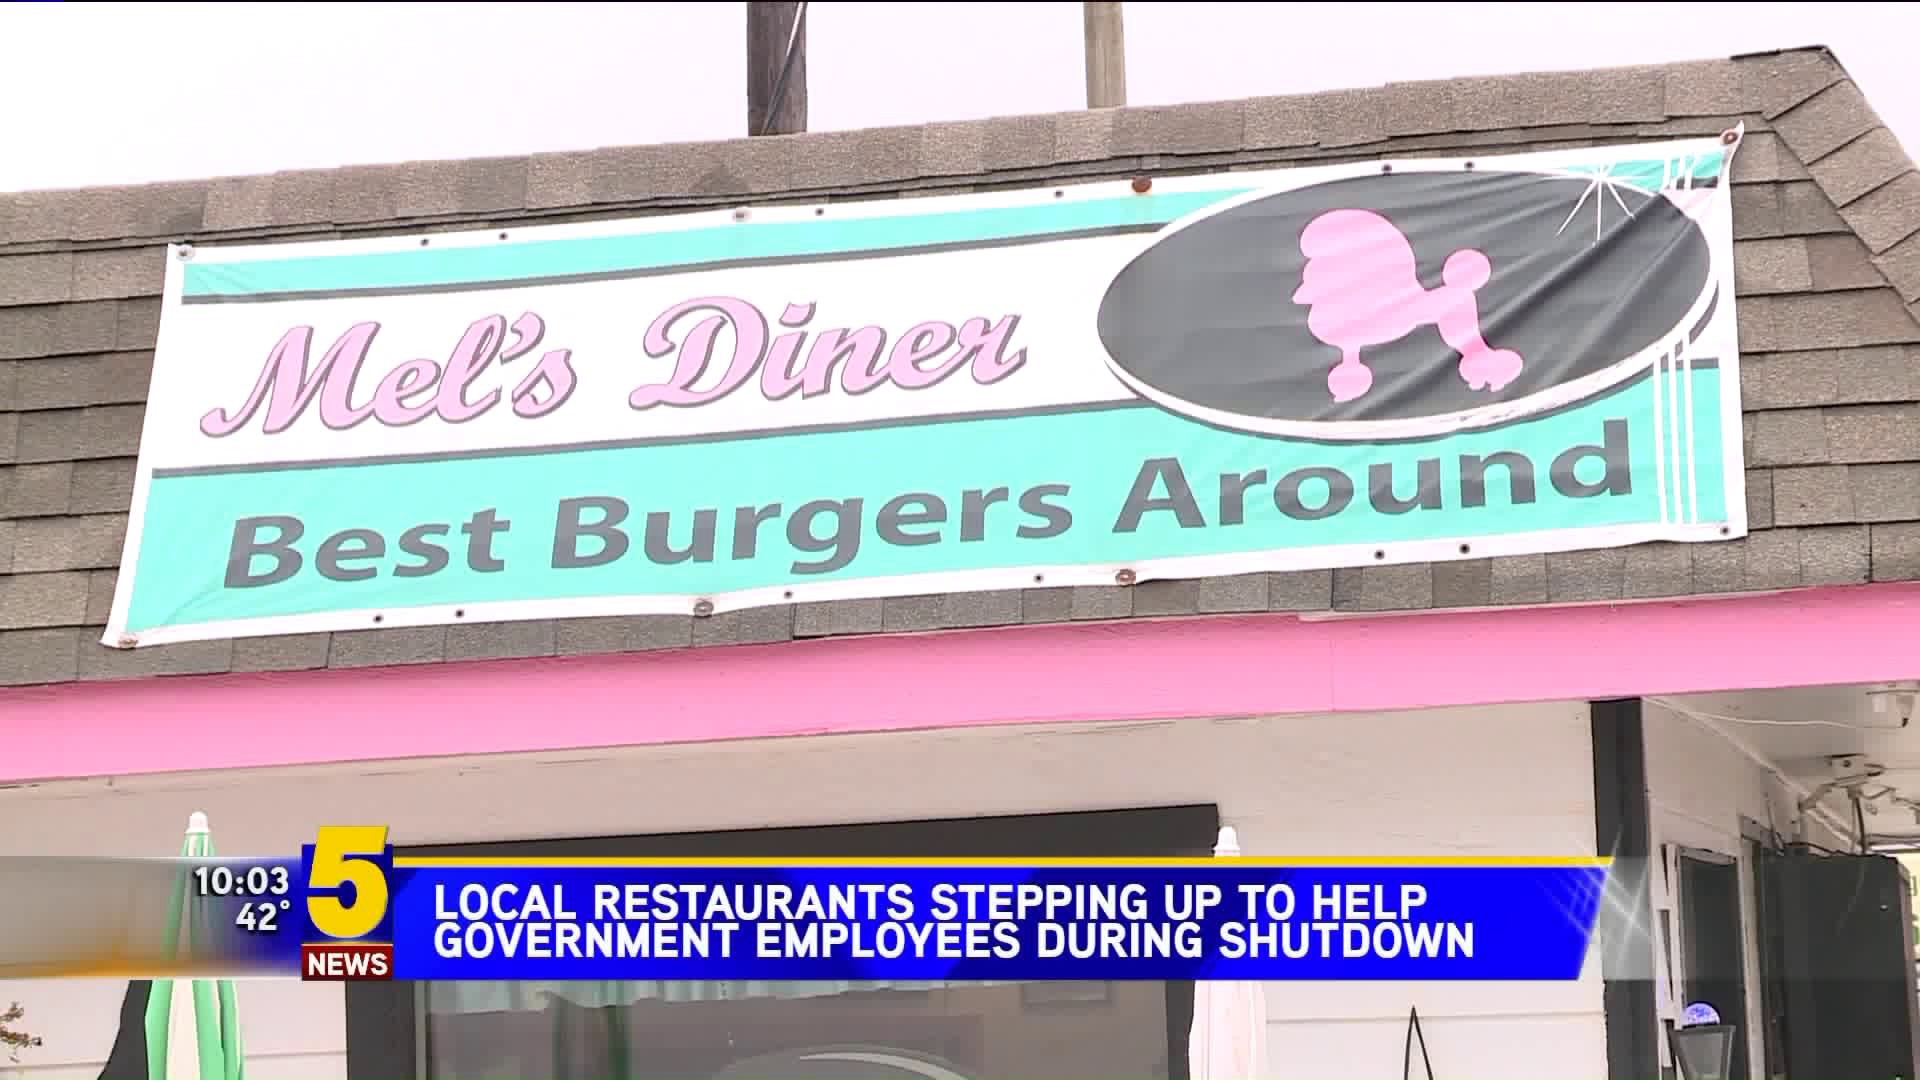 Local Resaurants Stepping Up To Help Government Employees During Shutdown